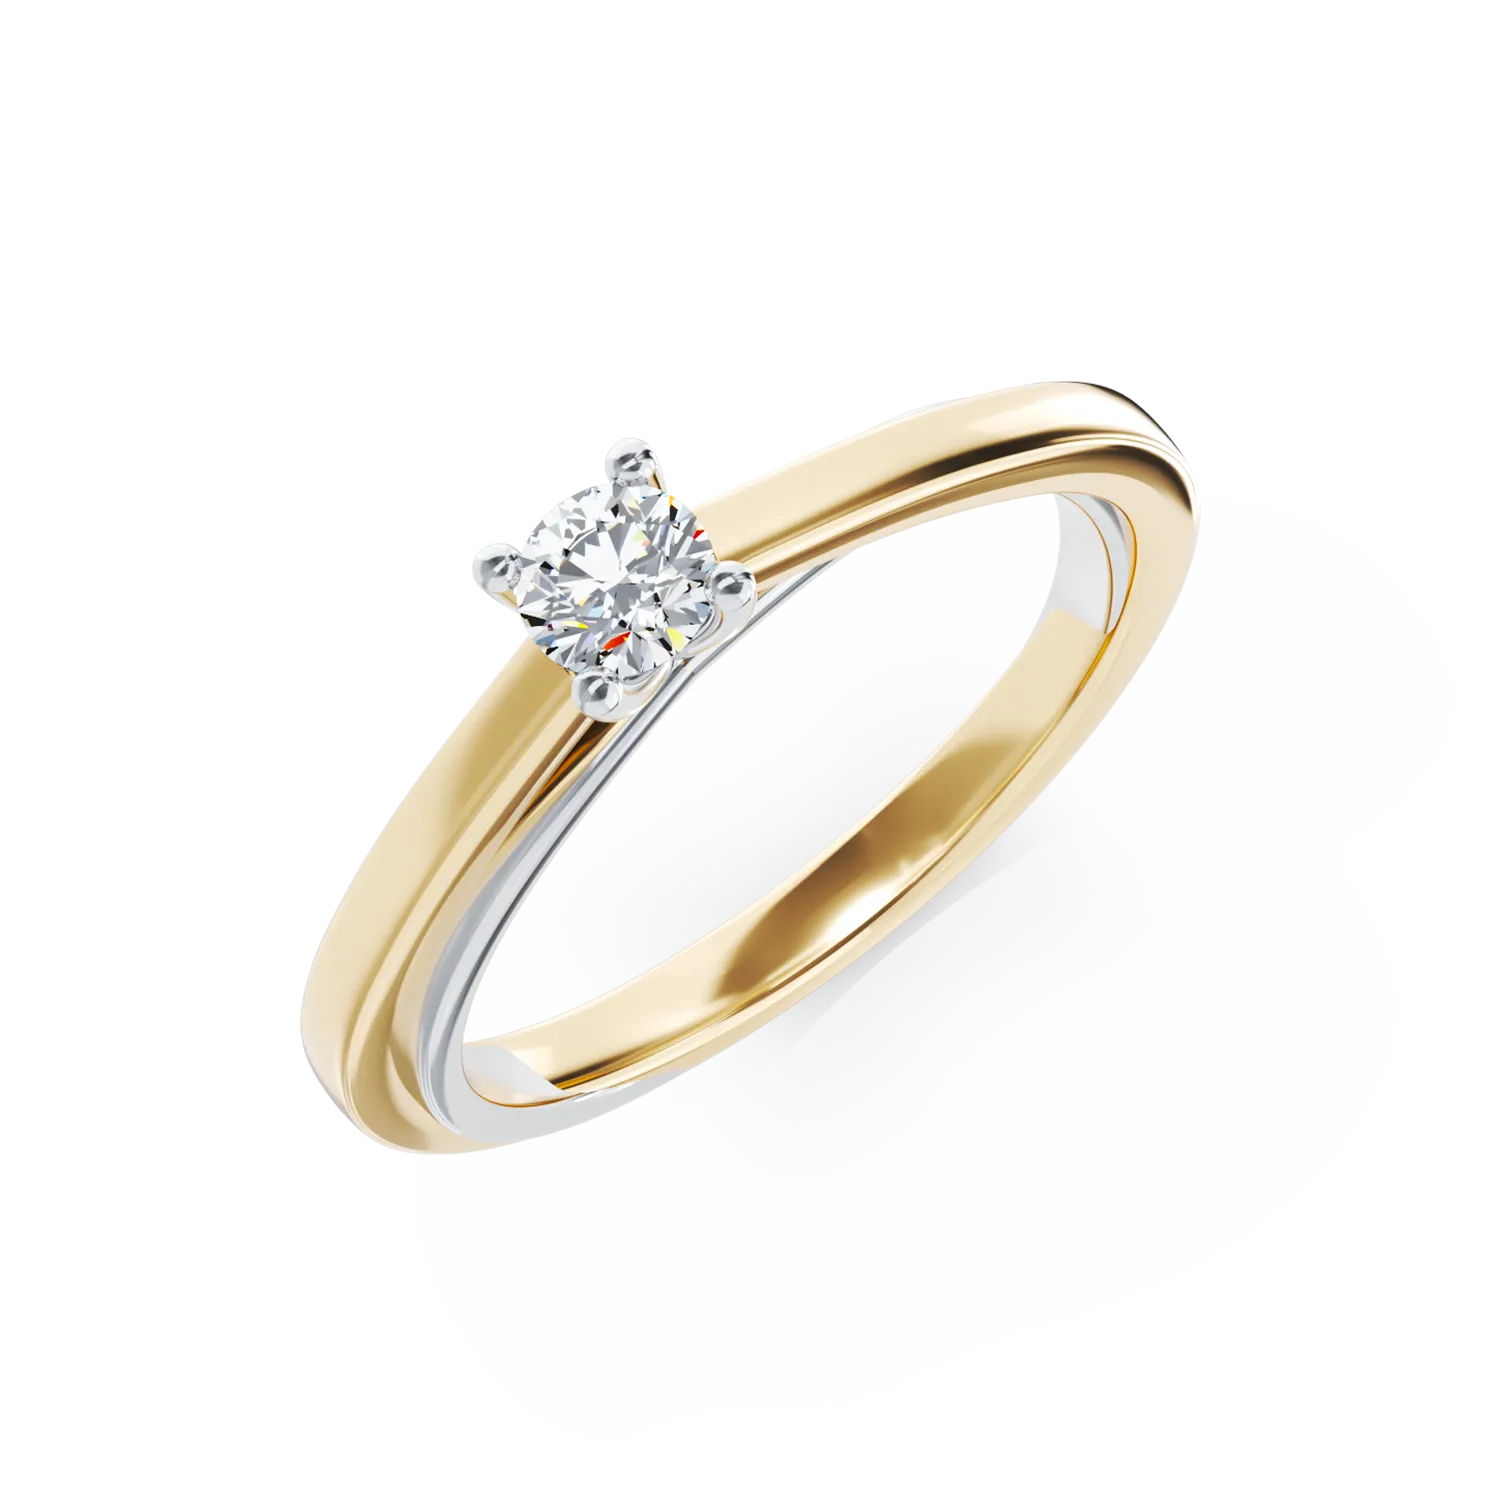 18K white-yellow gold engagement ring with 0.19ct solitaire diamond